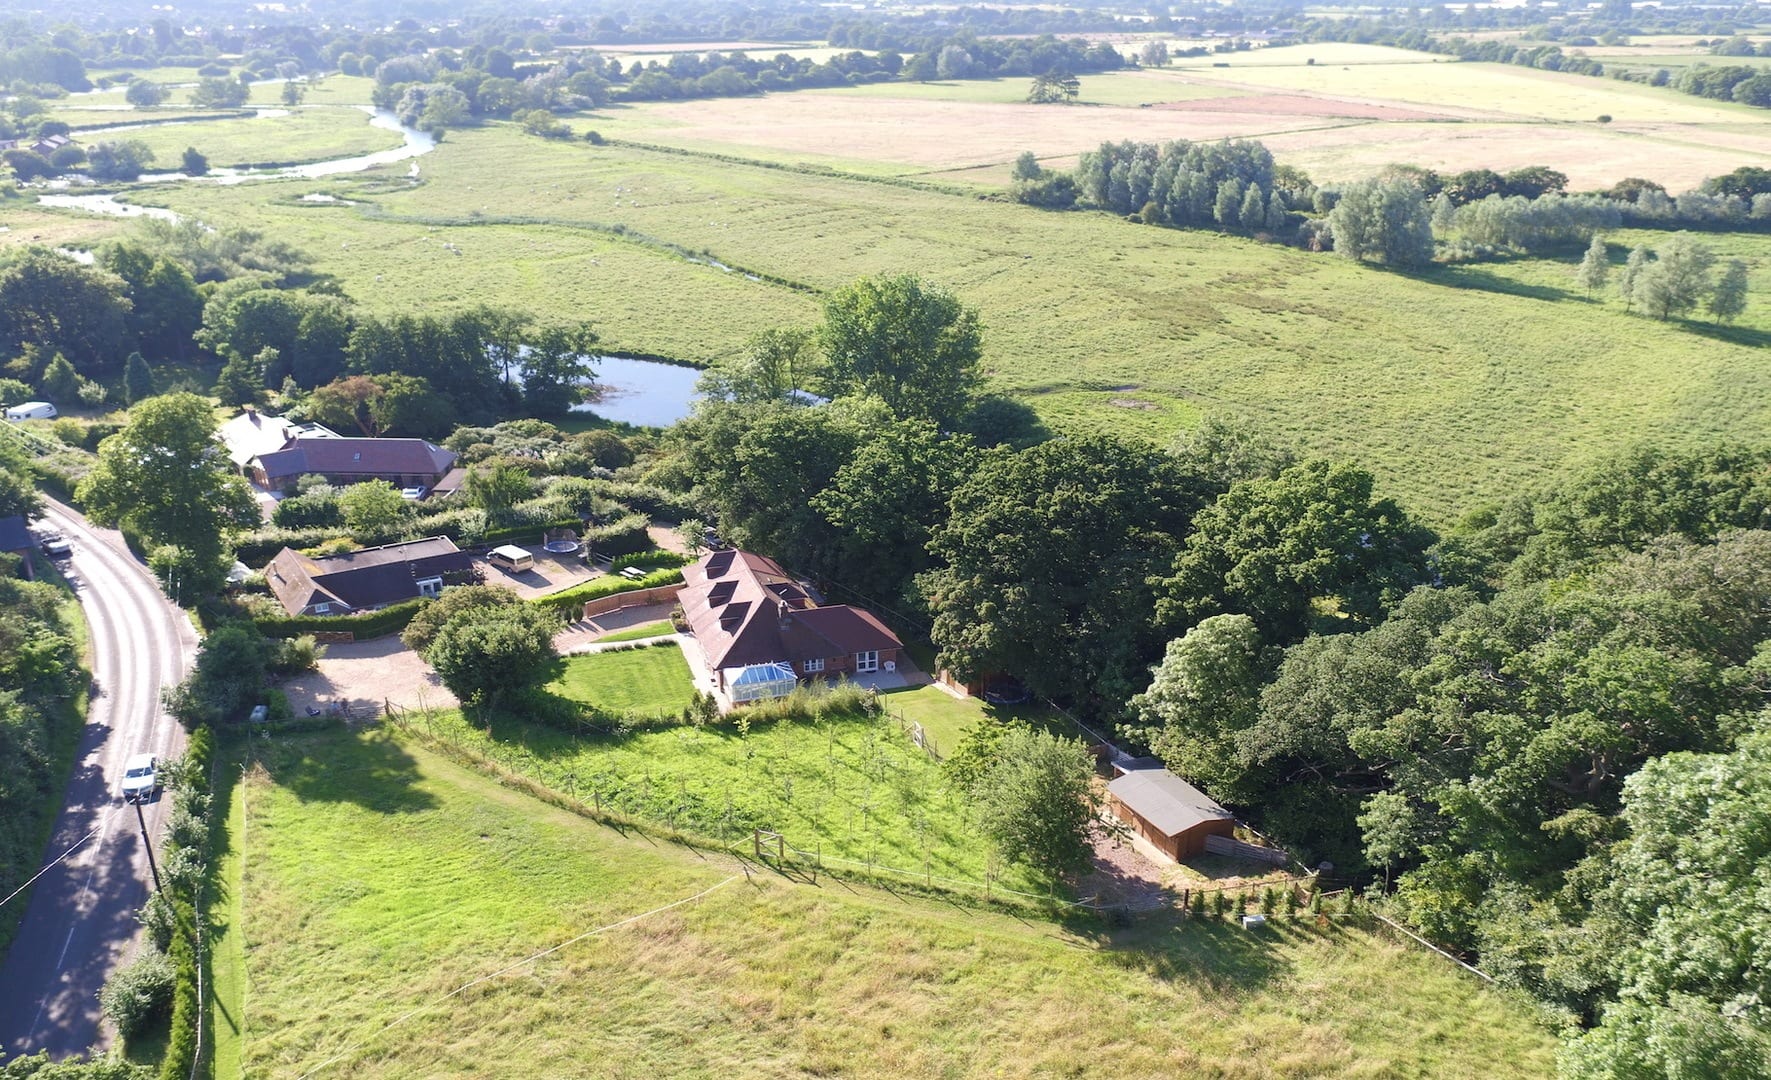 Mews Hill aerial shot showing stables and grazing